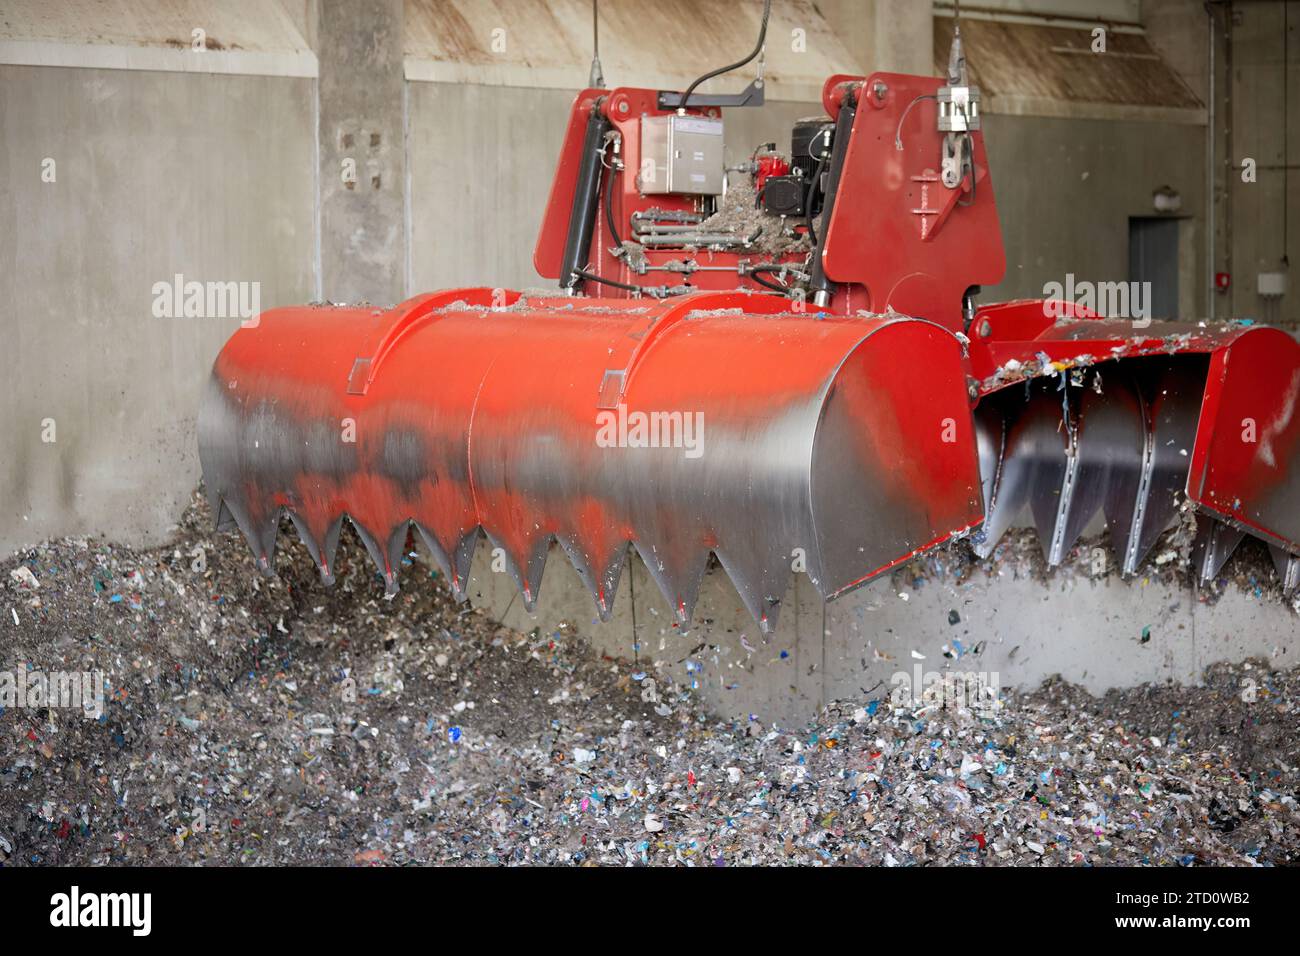 A red bridge crane grab during Waste derived fuel handling. Processing of municipal solid waste into an energy source. Stock Photo